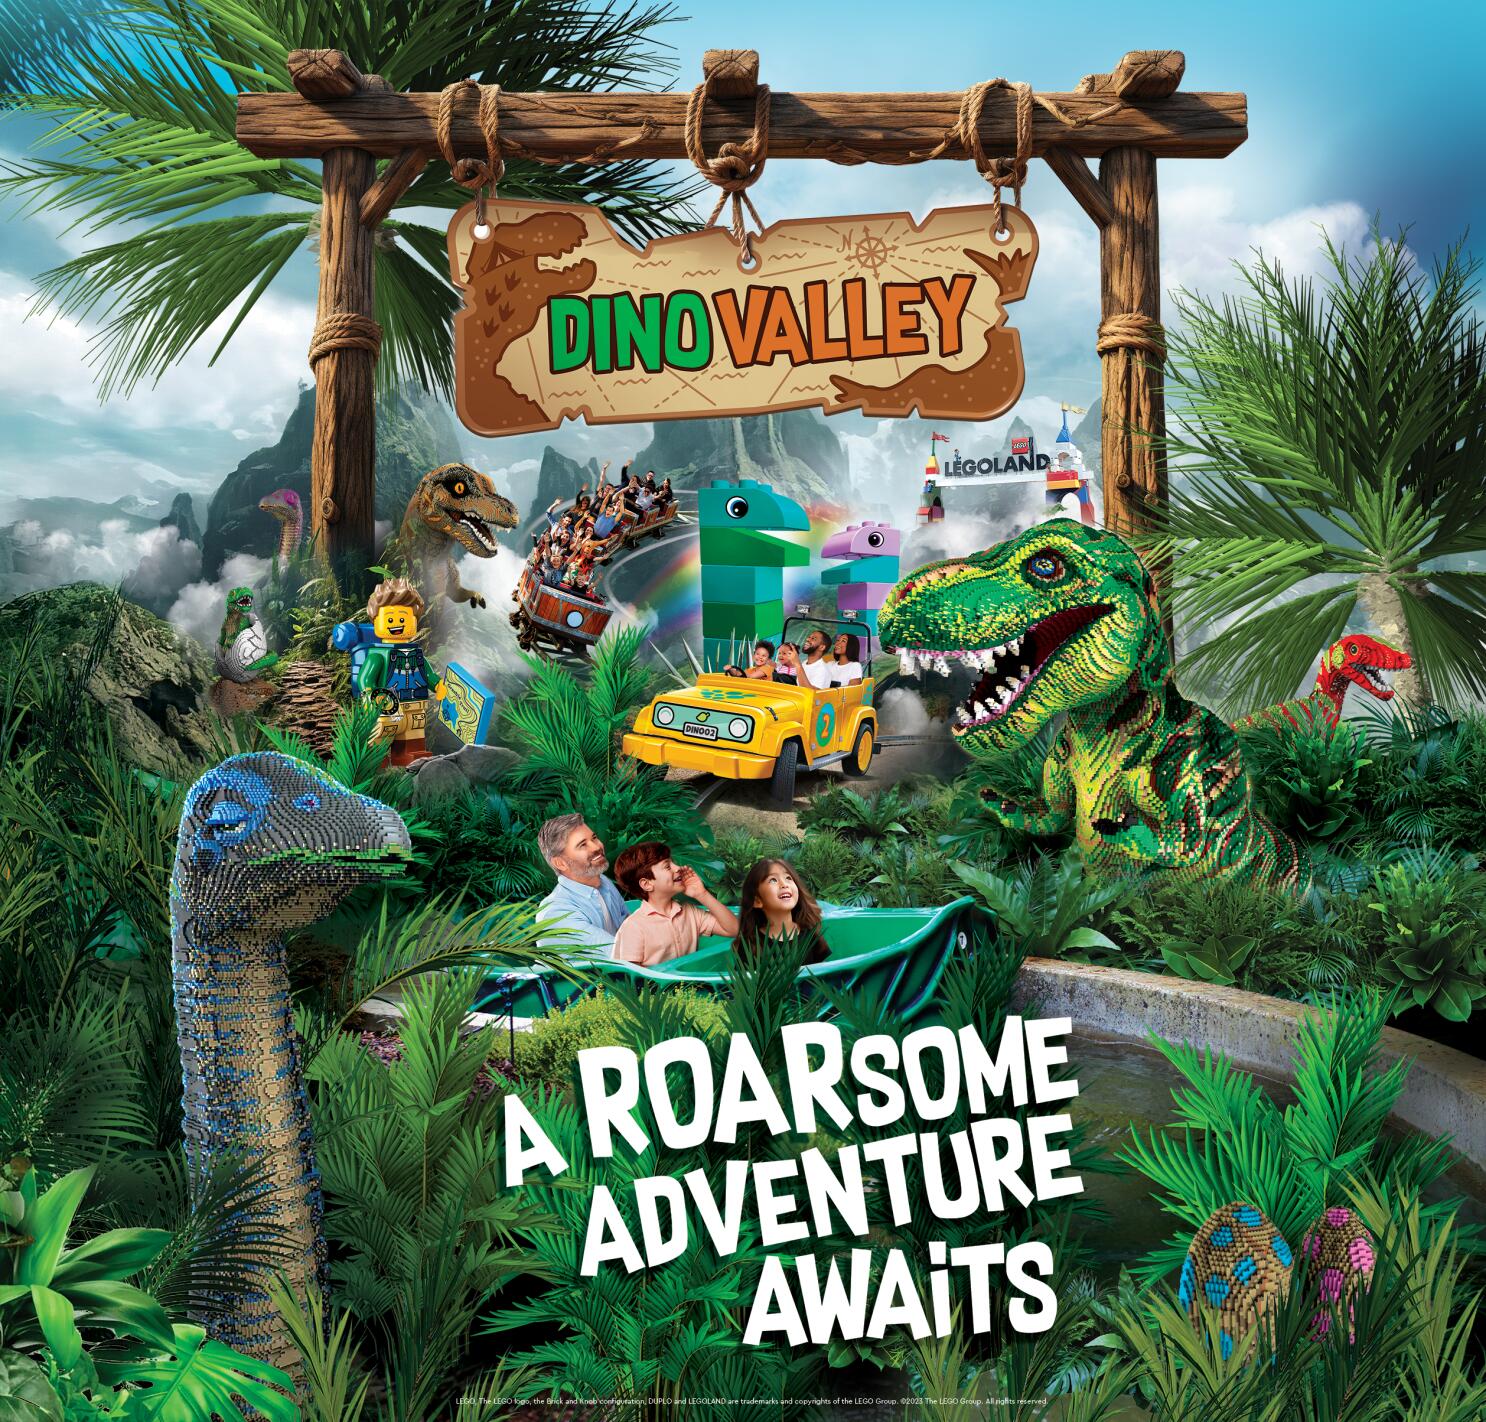 Family adventure park Totally Roarsome opens this weekend